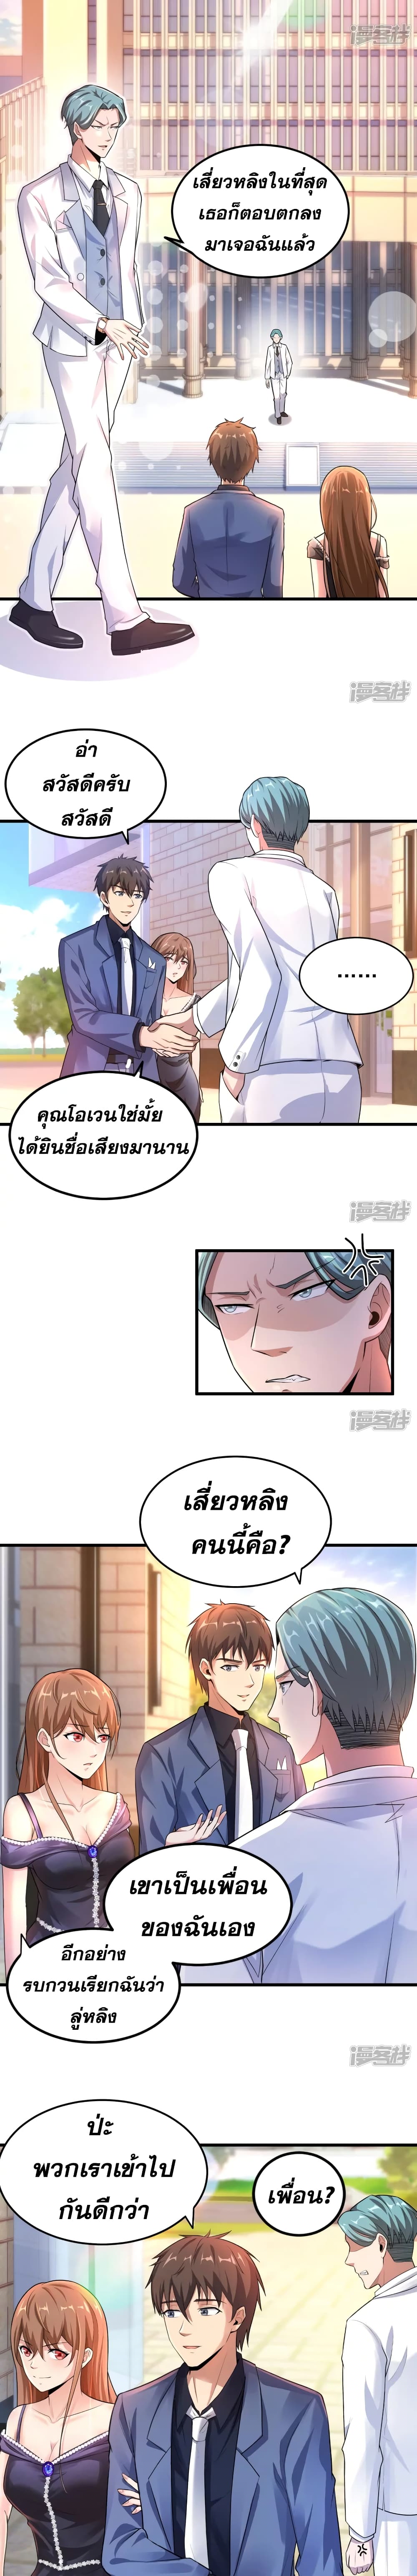 Super Infected ตอนที่ 8 (6)